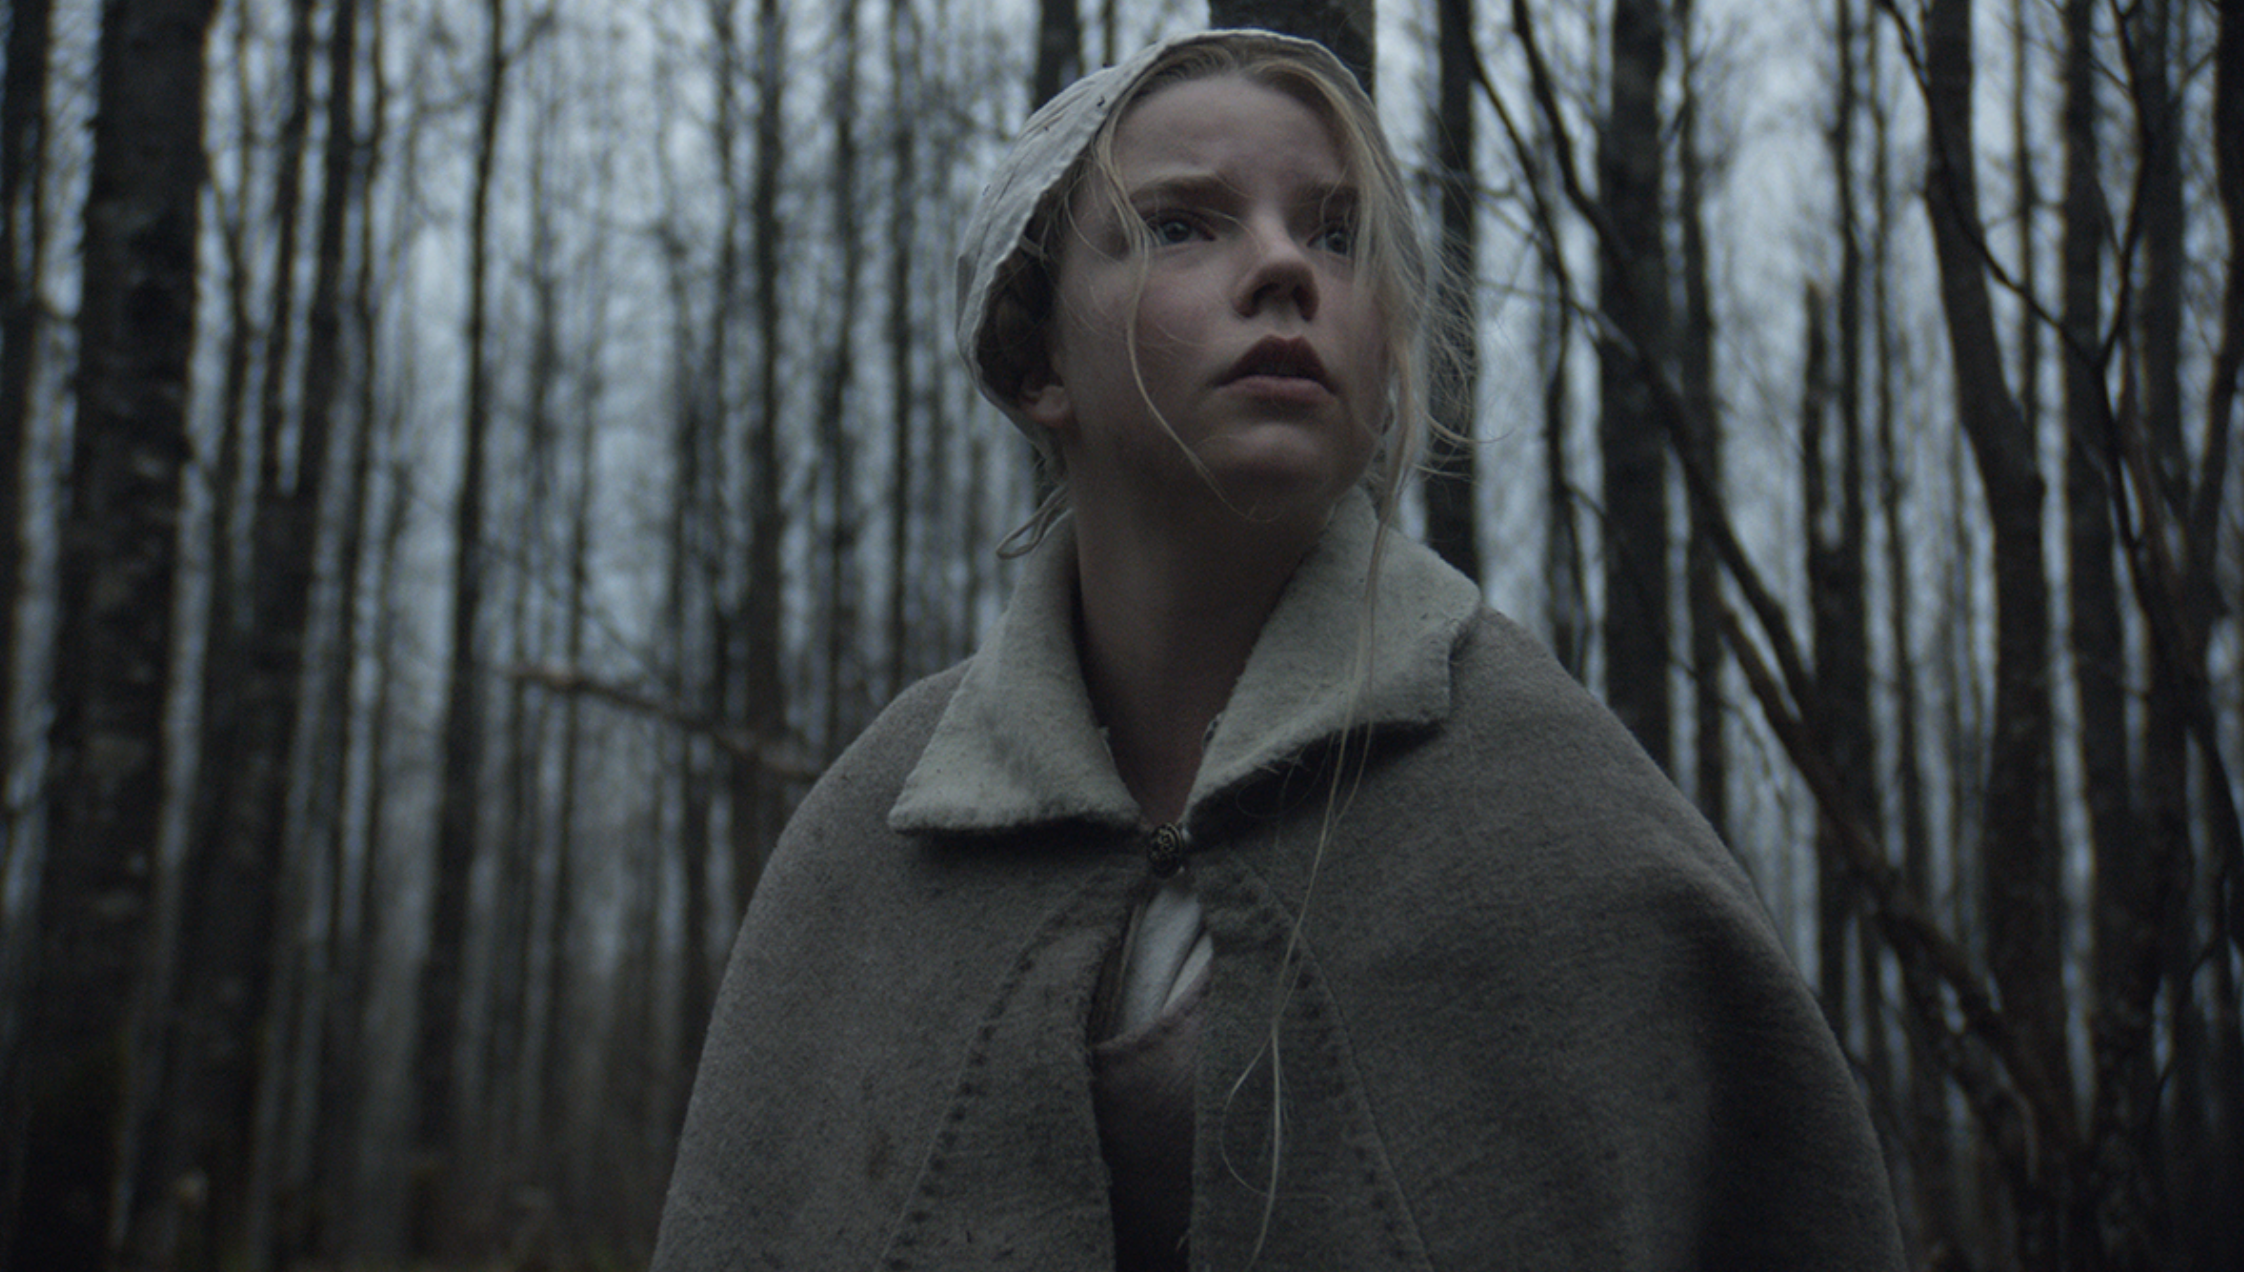 The Witch Robert Eggers